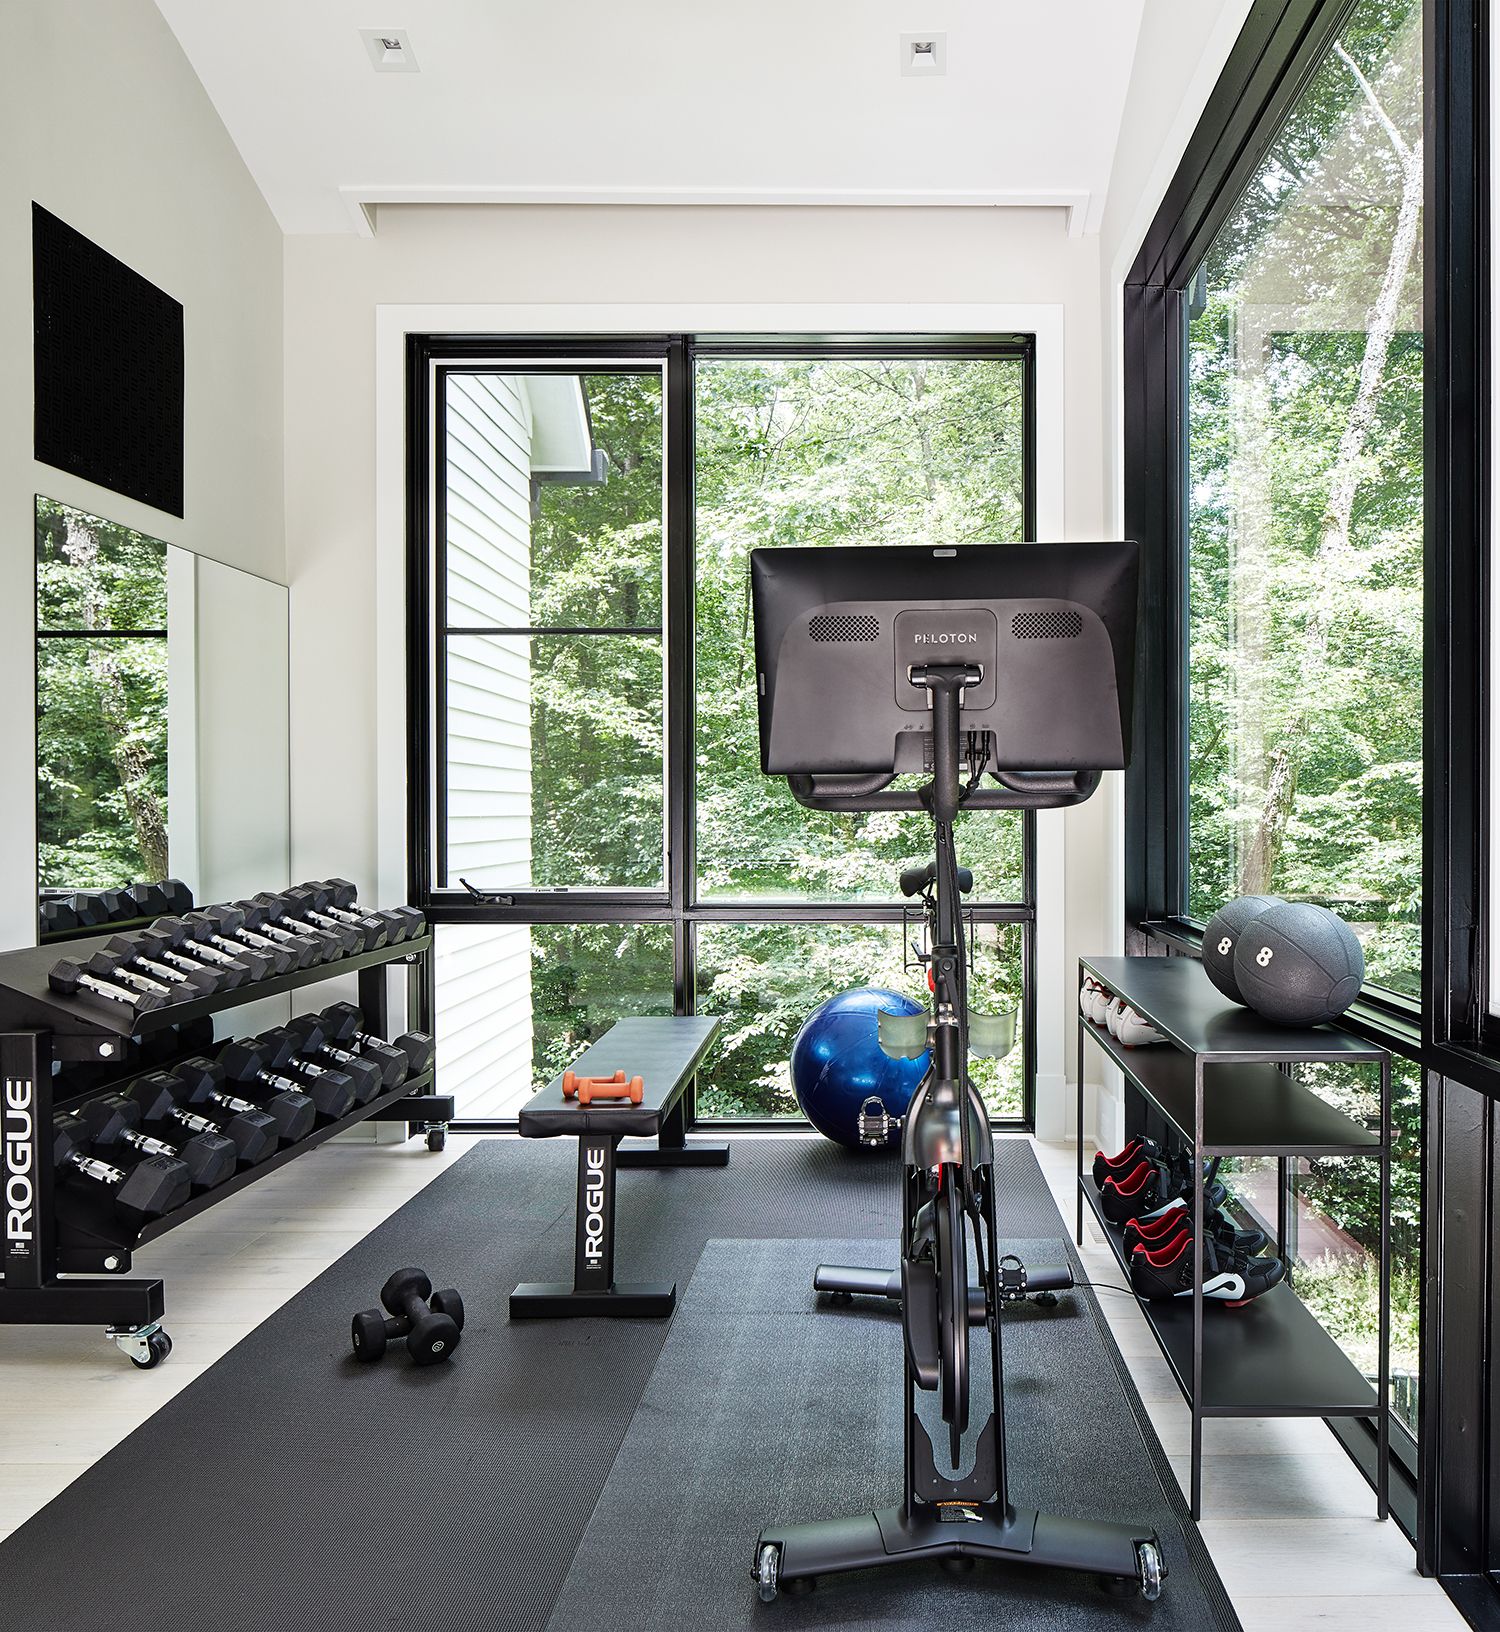 How to train at home: set up the perfect
training room